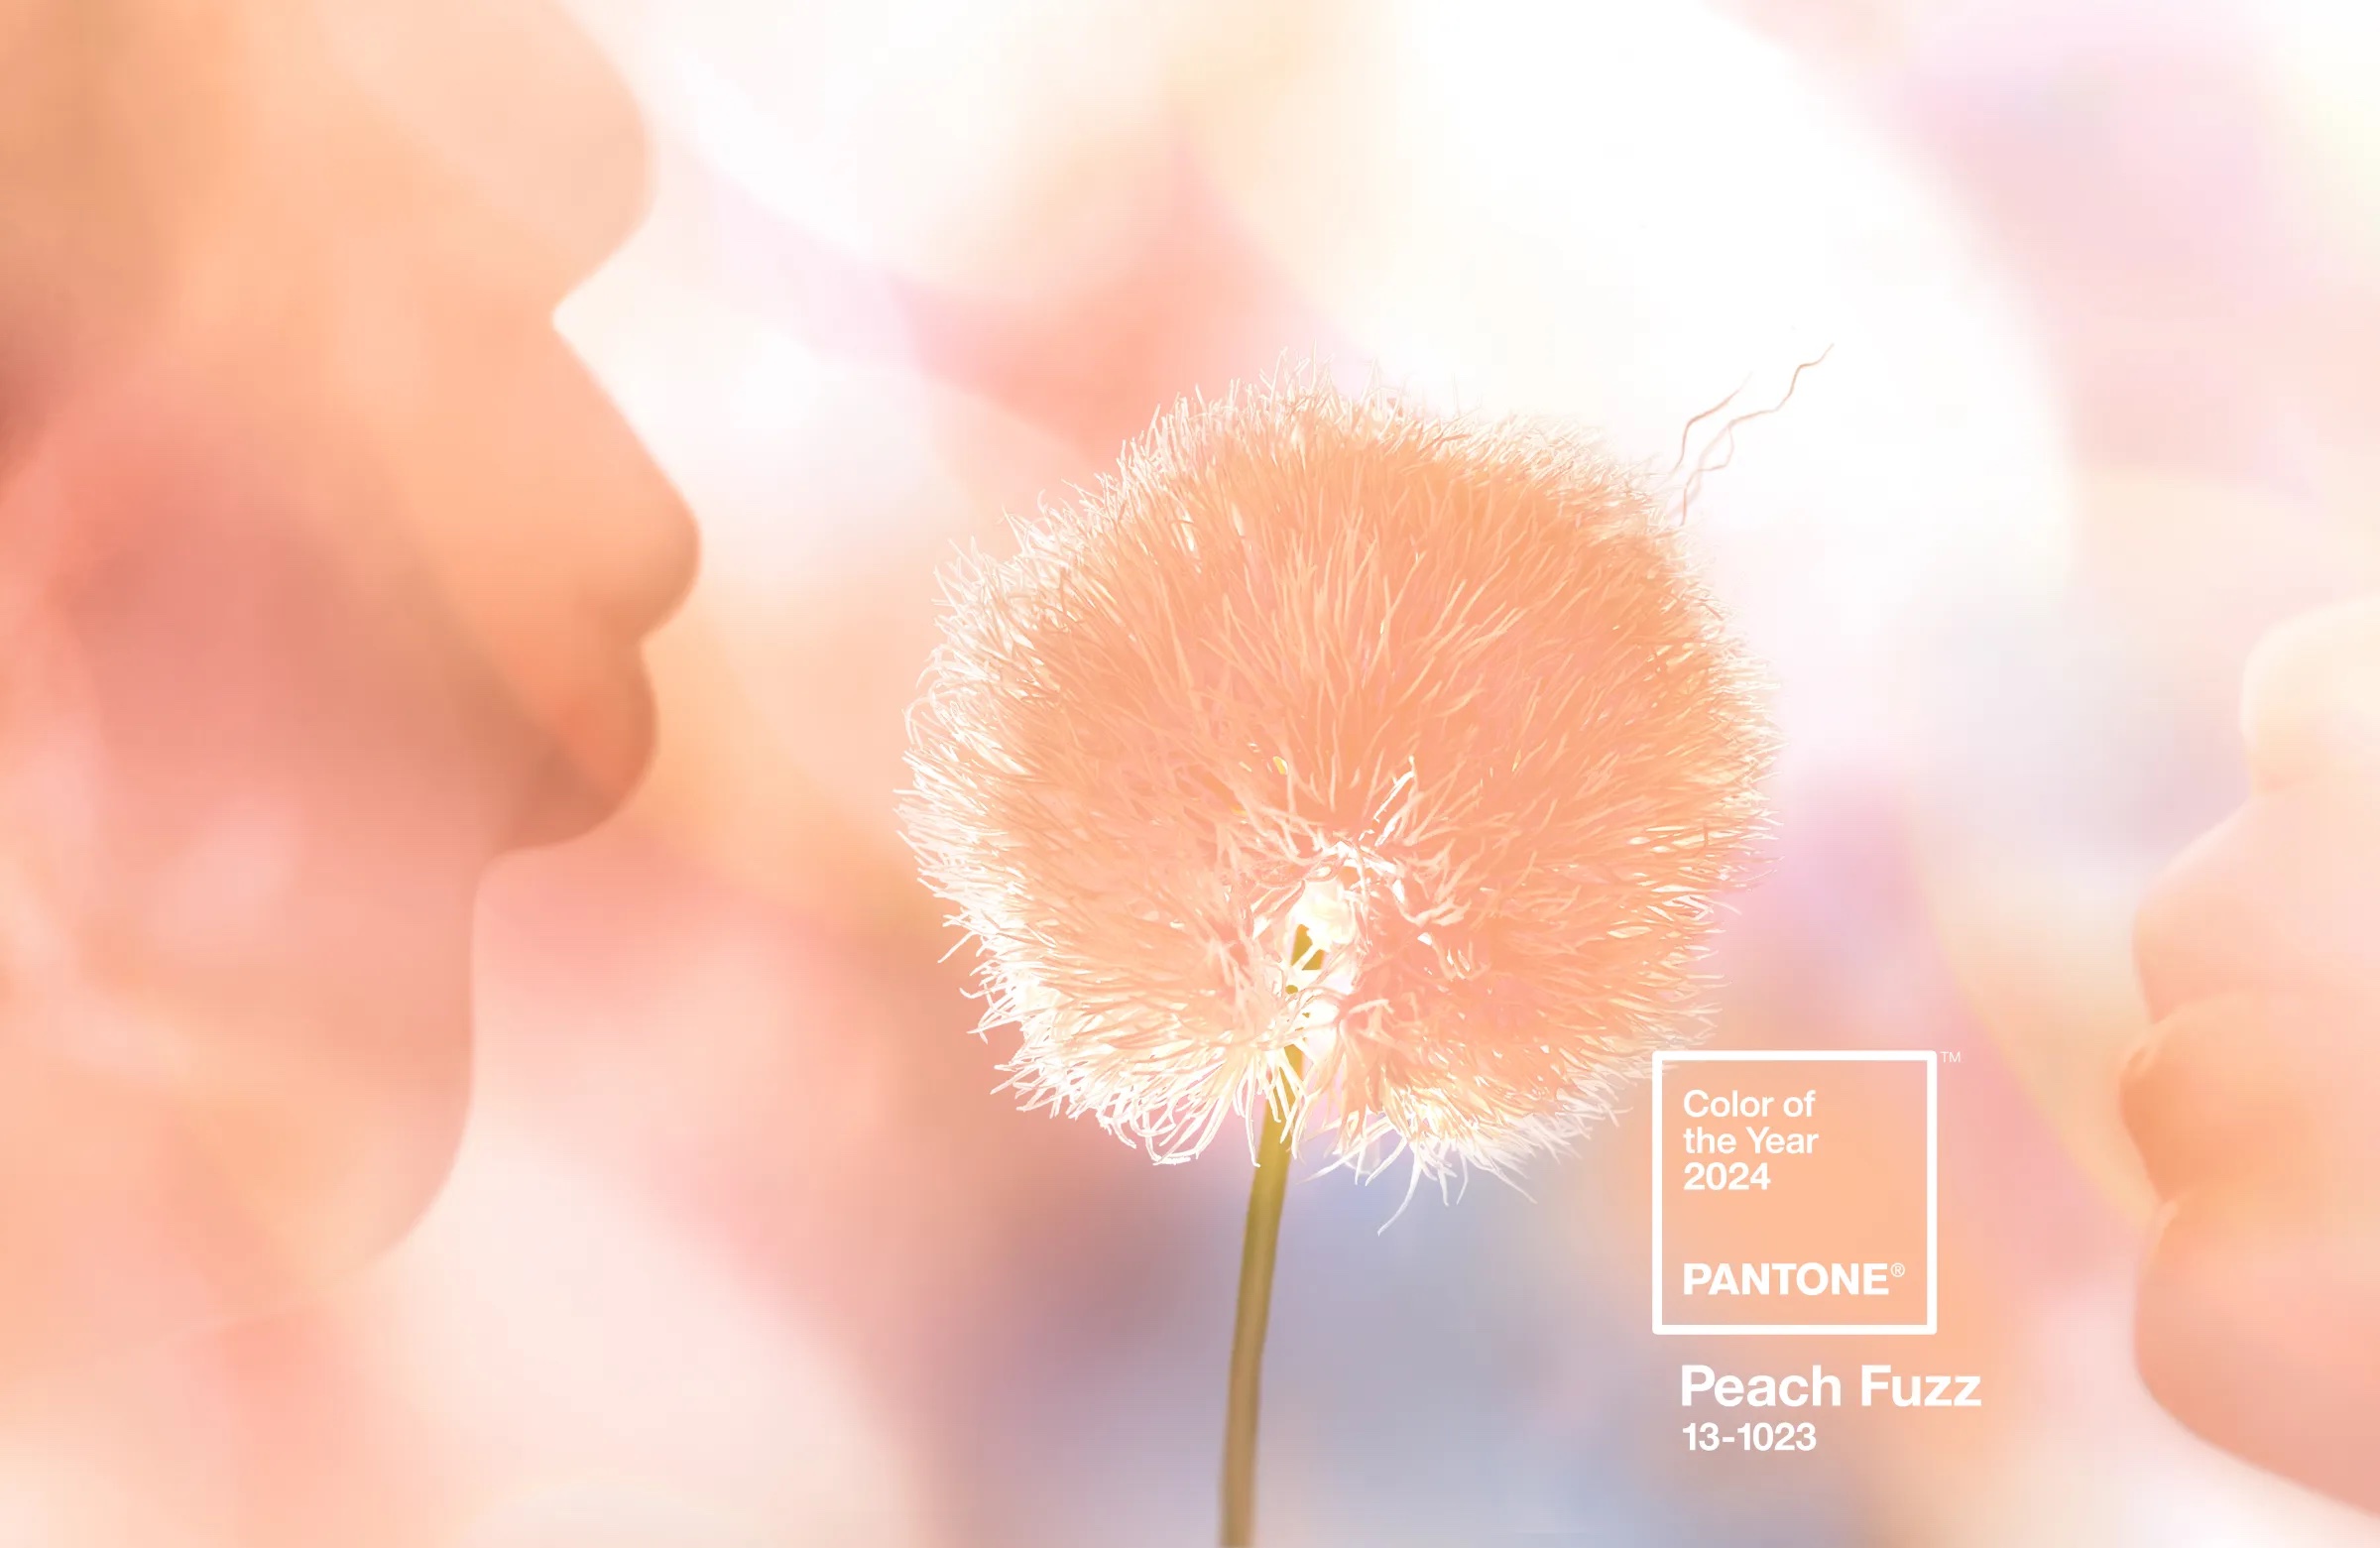 Pantone's 2024 Color of the Year: Peach Fuzz